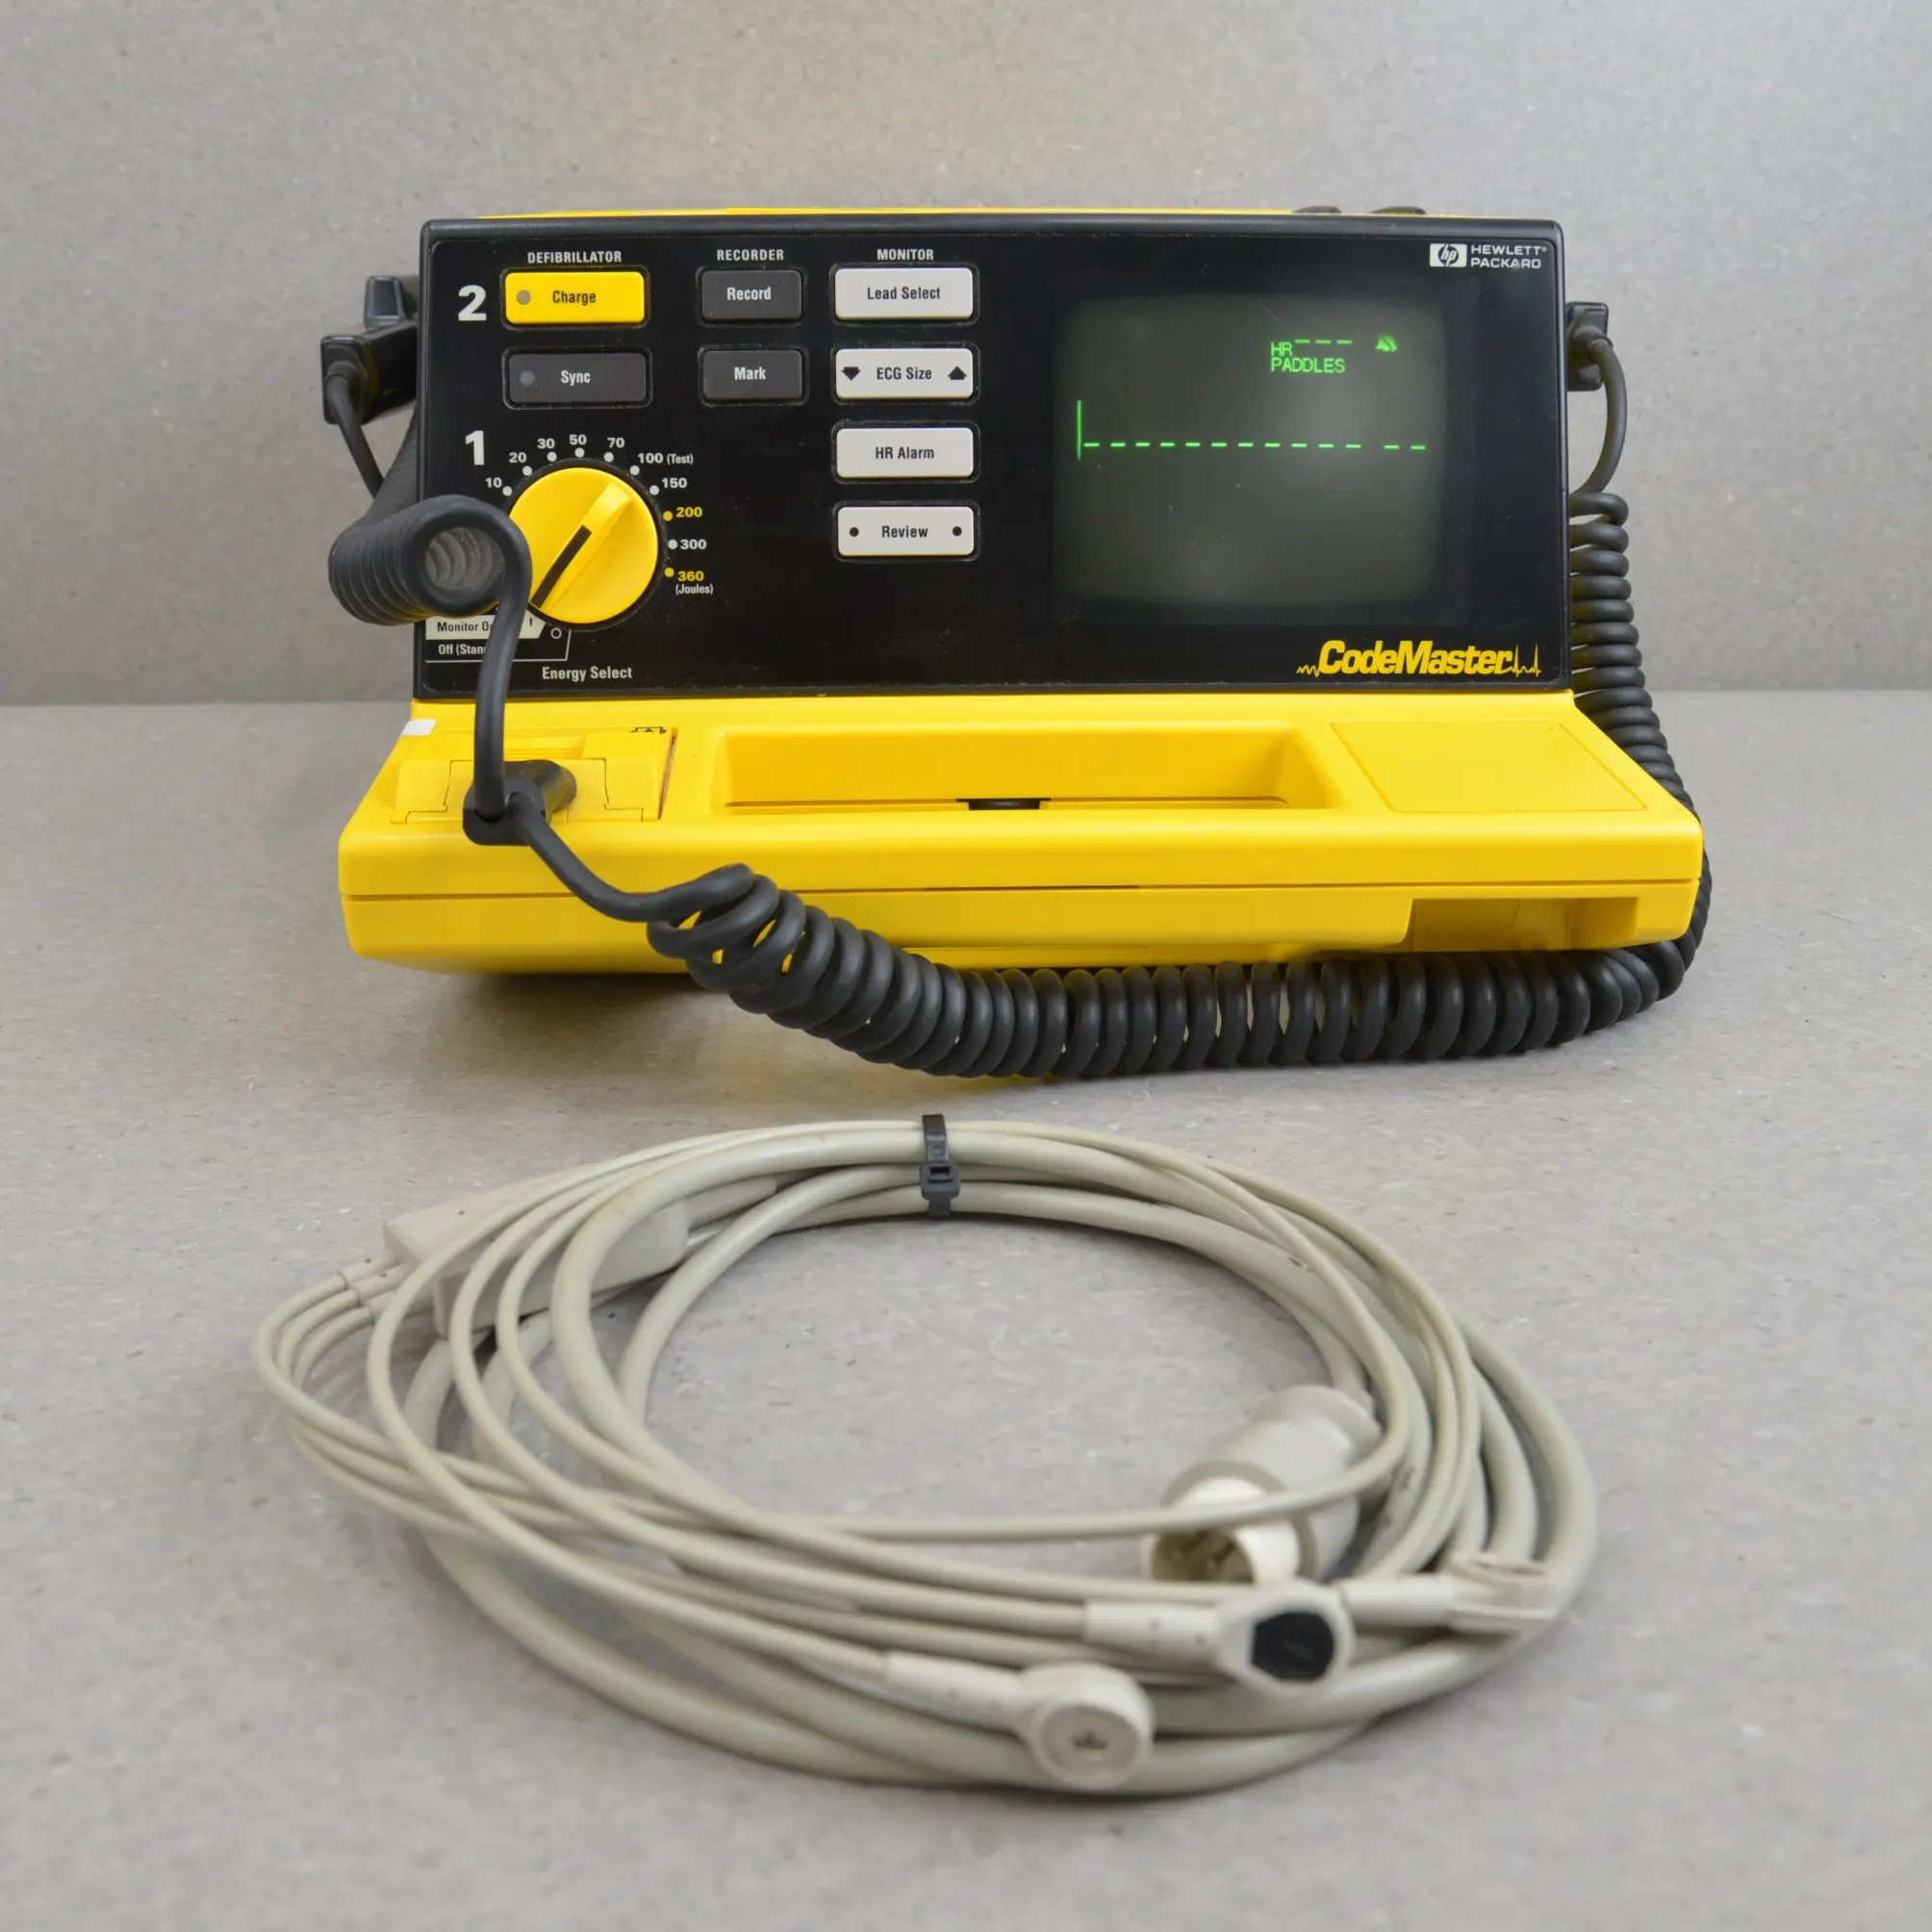 hewlett packard ecg machine with cables - What machine is used for an ECG